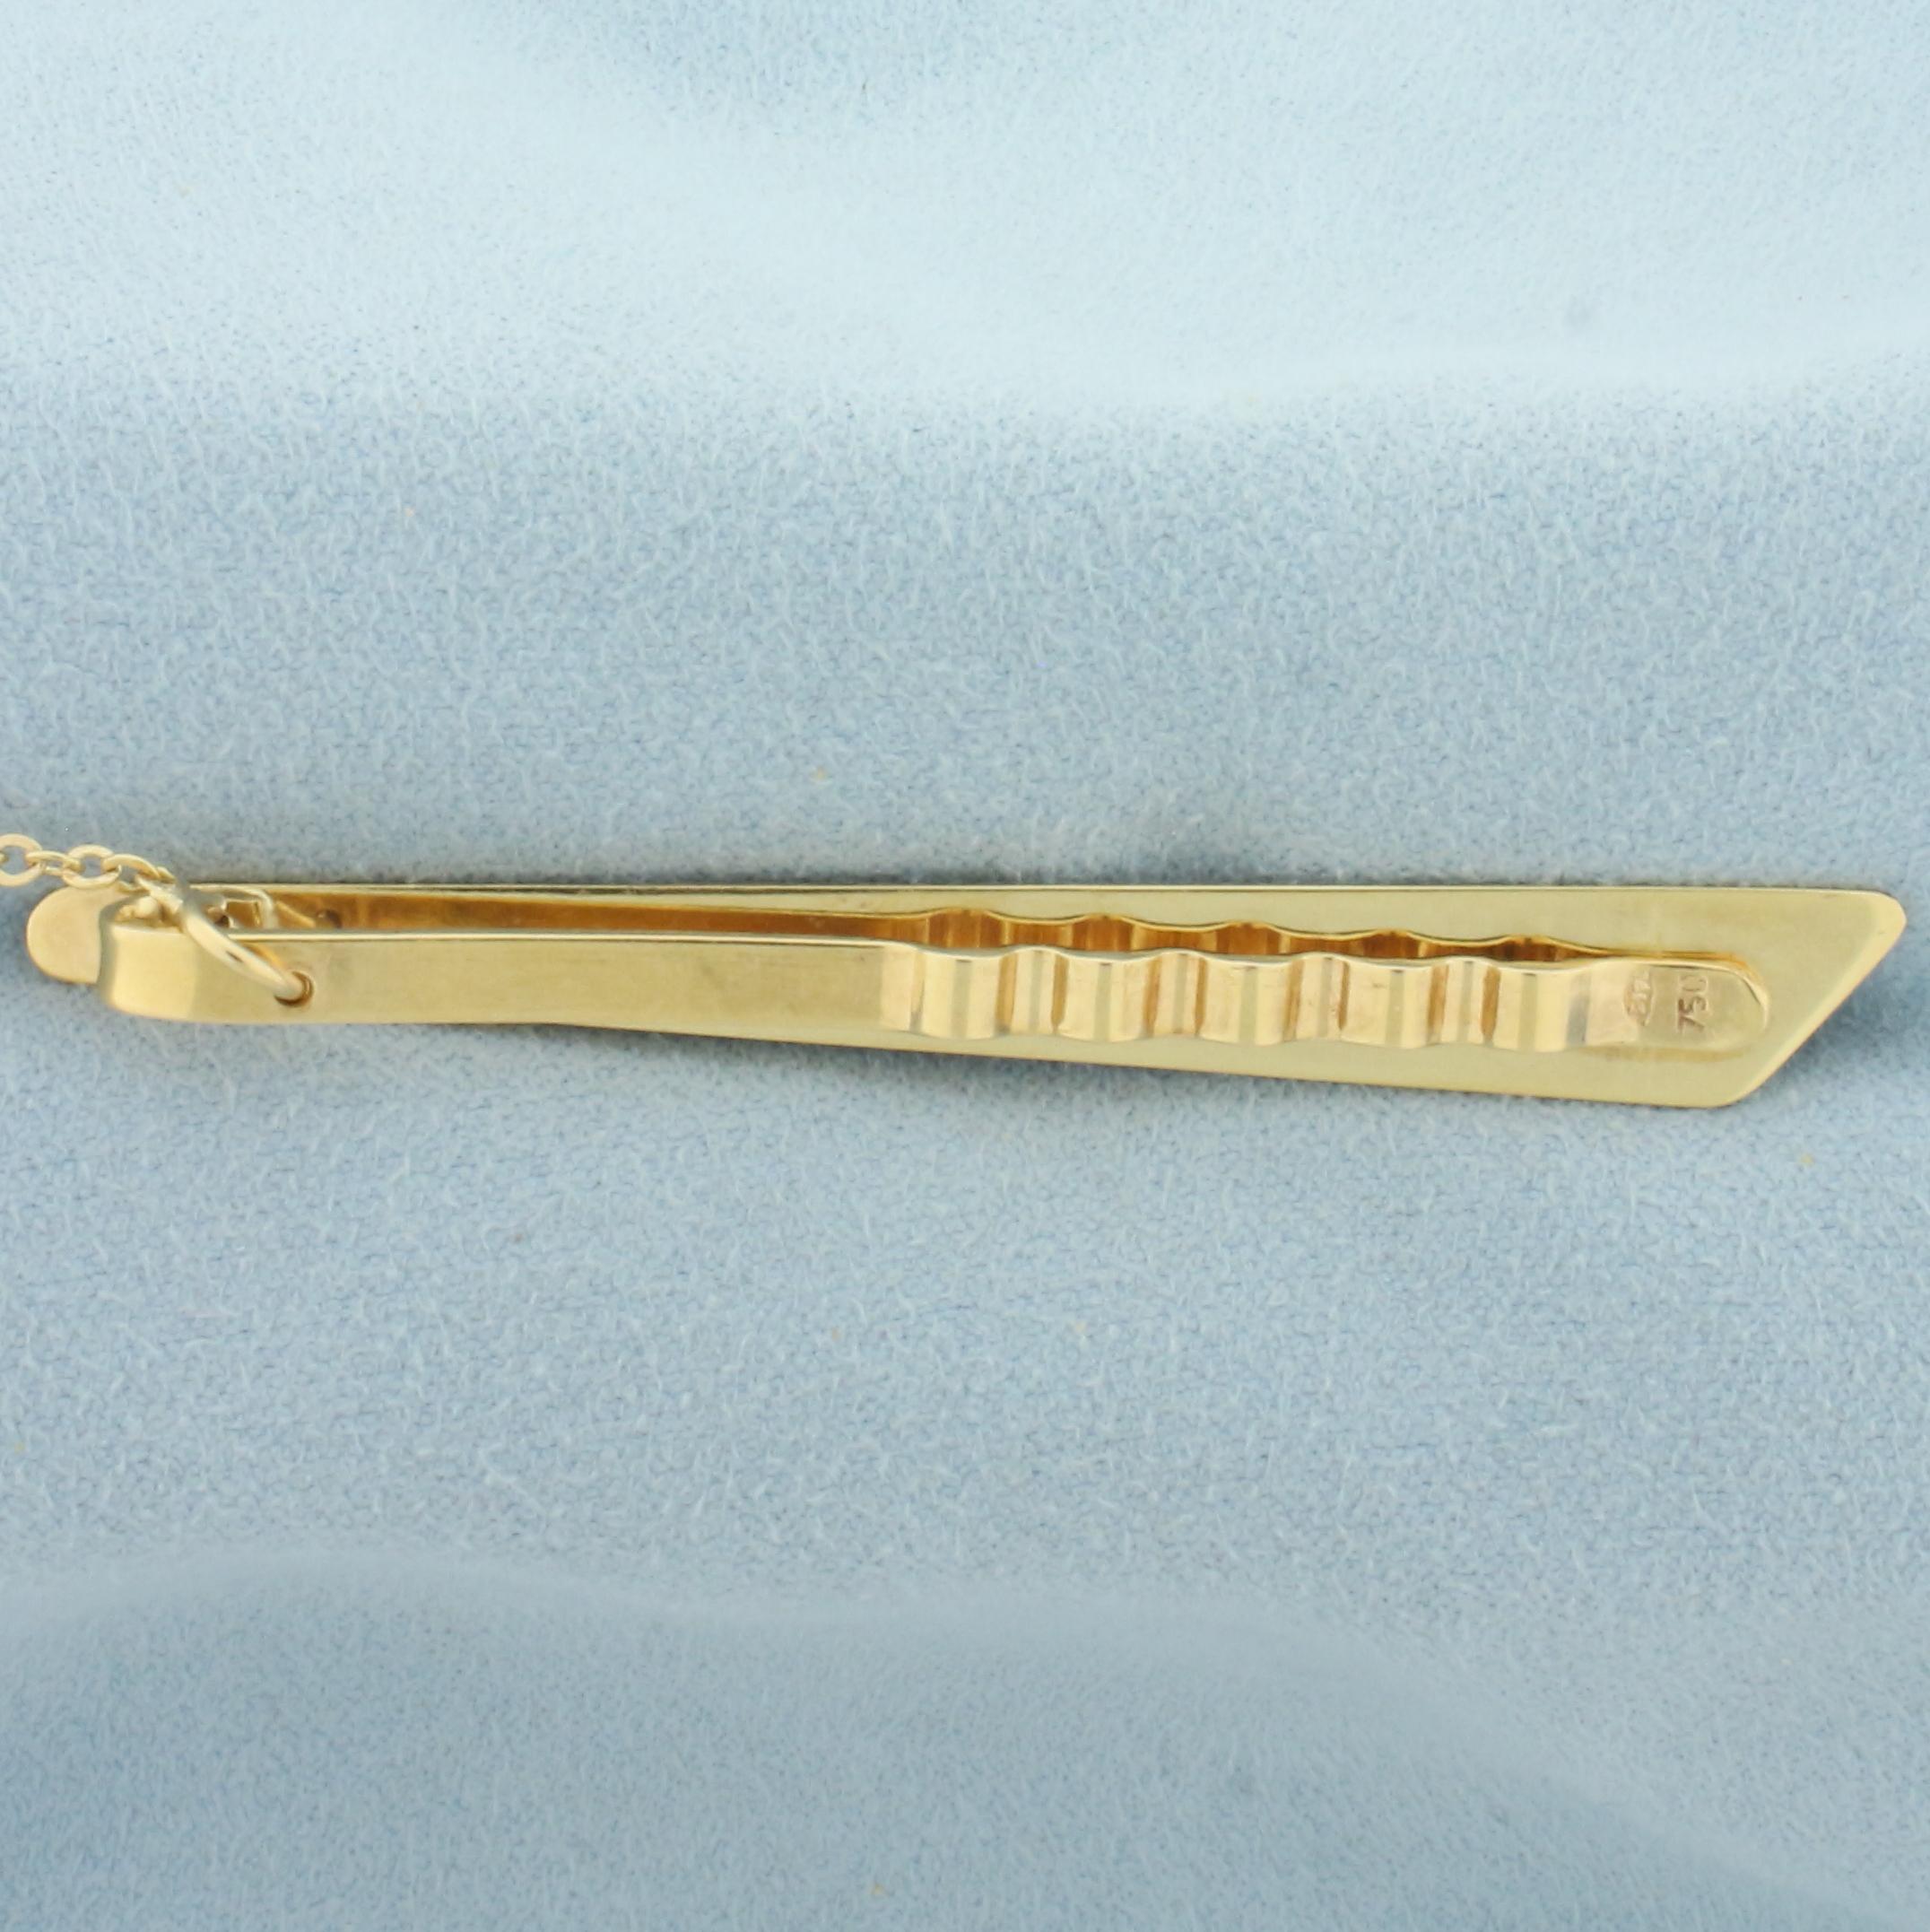 Vintage Engraved Tie Bar Clip With Chain In 18k Yellow Gold